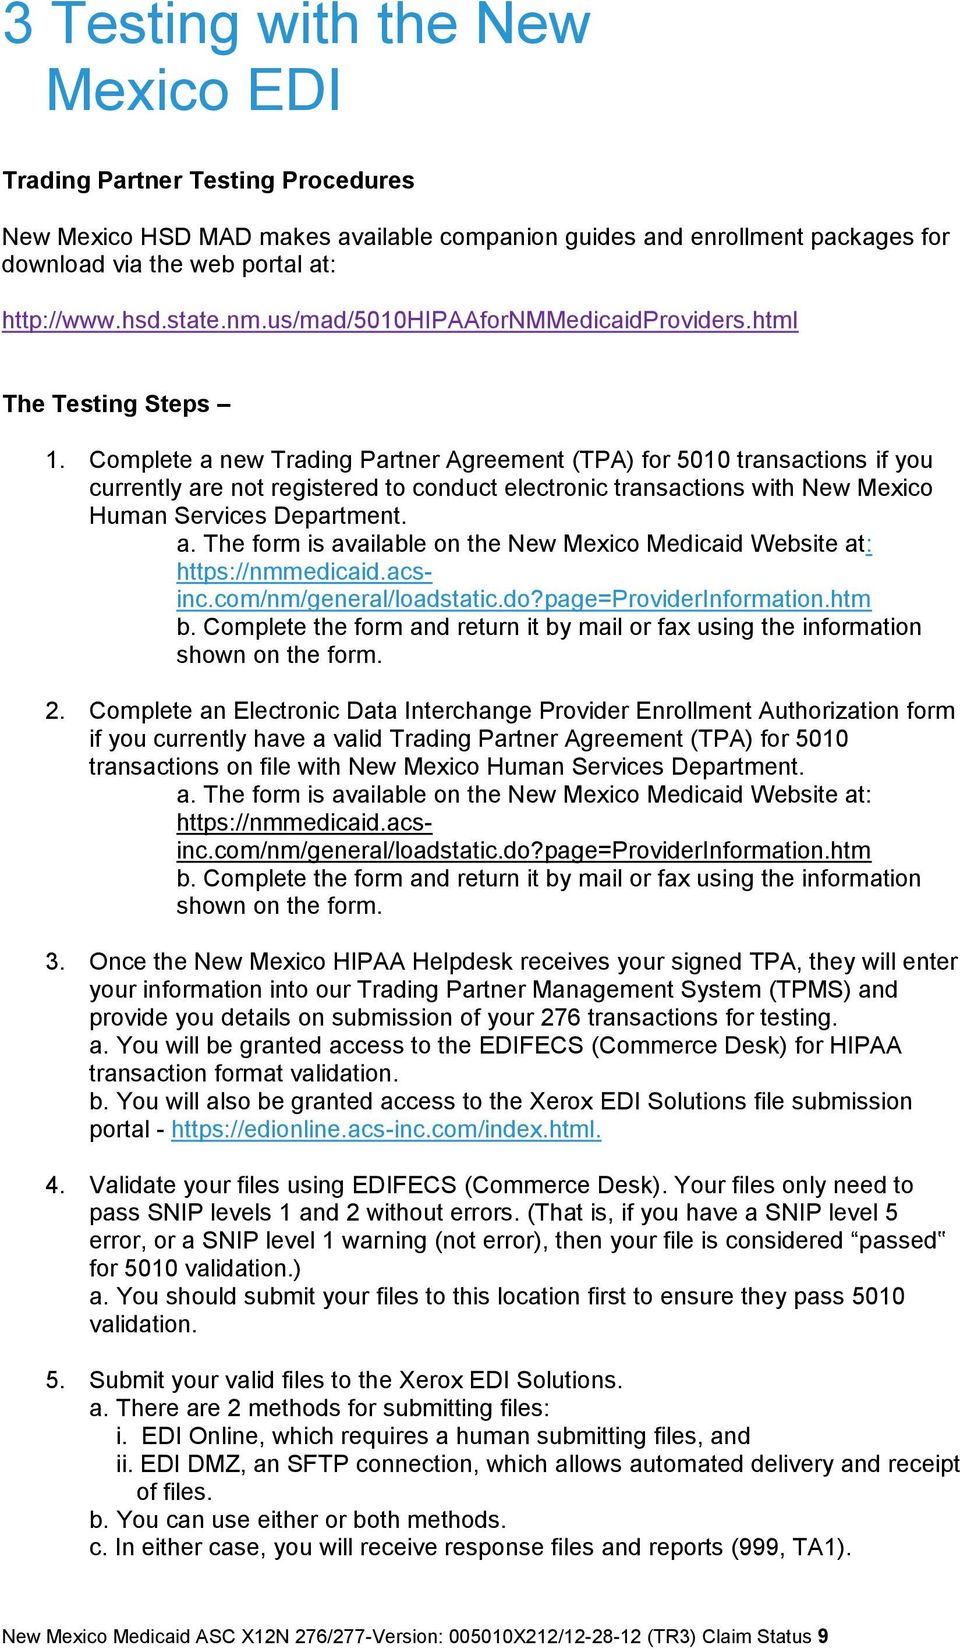 Complete a new Trading Partner Agreement (TPA) for 5010 transactions if you currently are not registered to conduct electronic transactions with New Mexico Human Services Department. a. The form is available on the New Mexico Medicaid Website at: https://nmmedicaid.